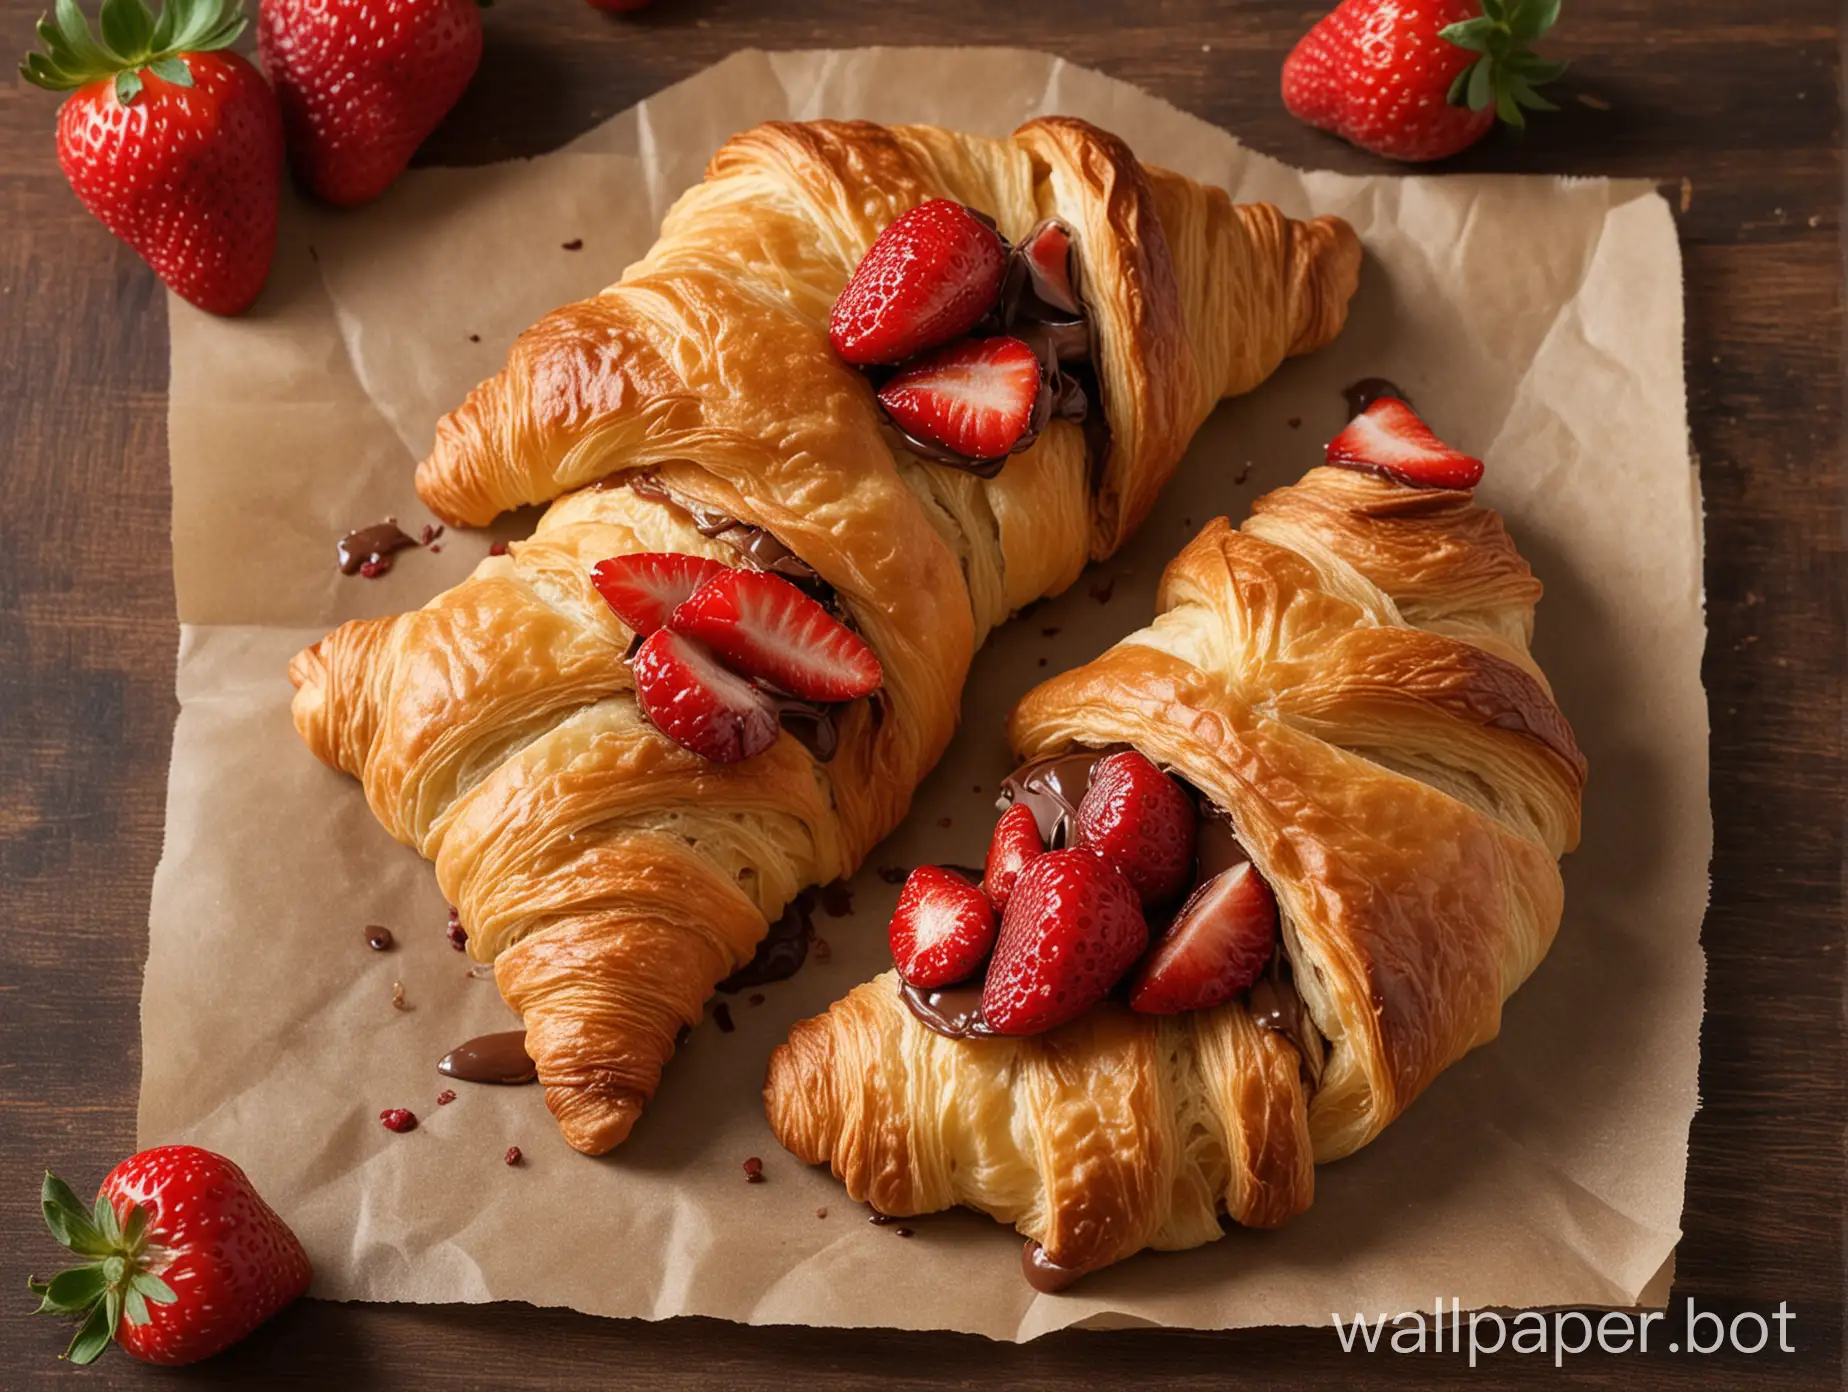 Delicious-Flat-Croissant-with-Fresh-Strawberries-and-Decadent-Nutella-Spread